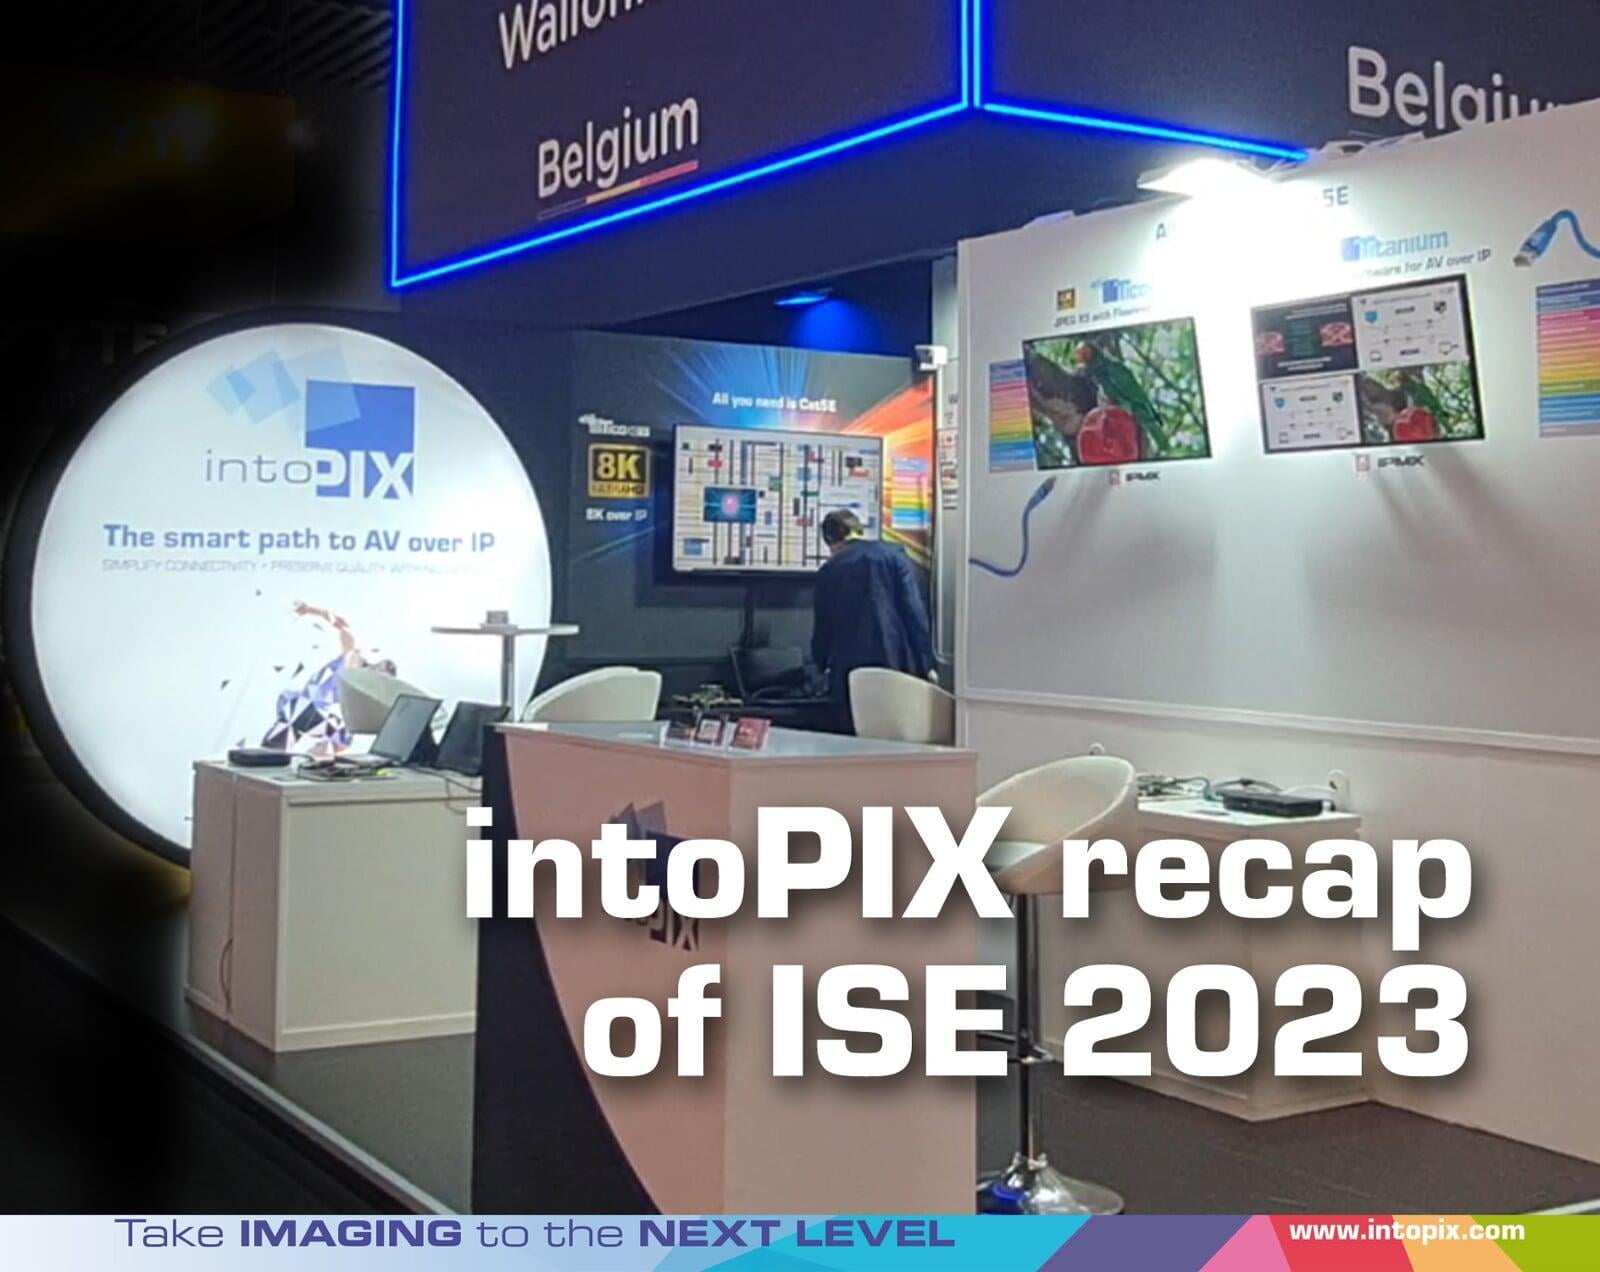 A recap of our intoPIX groundbreaking highlights showcased at ISE 2023